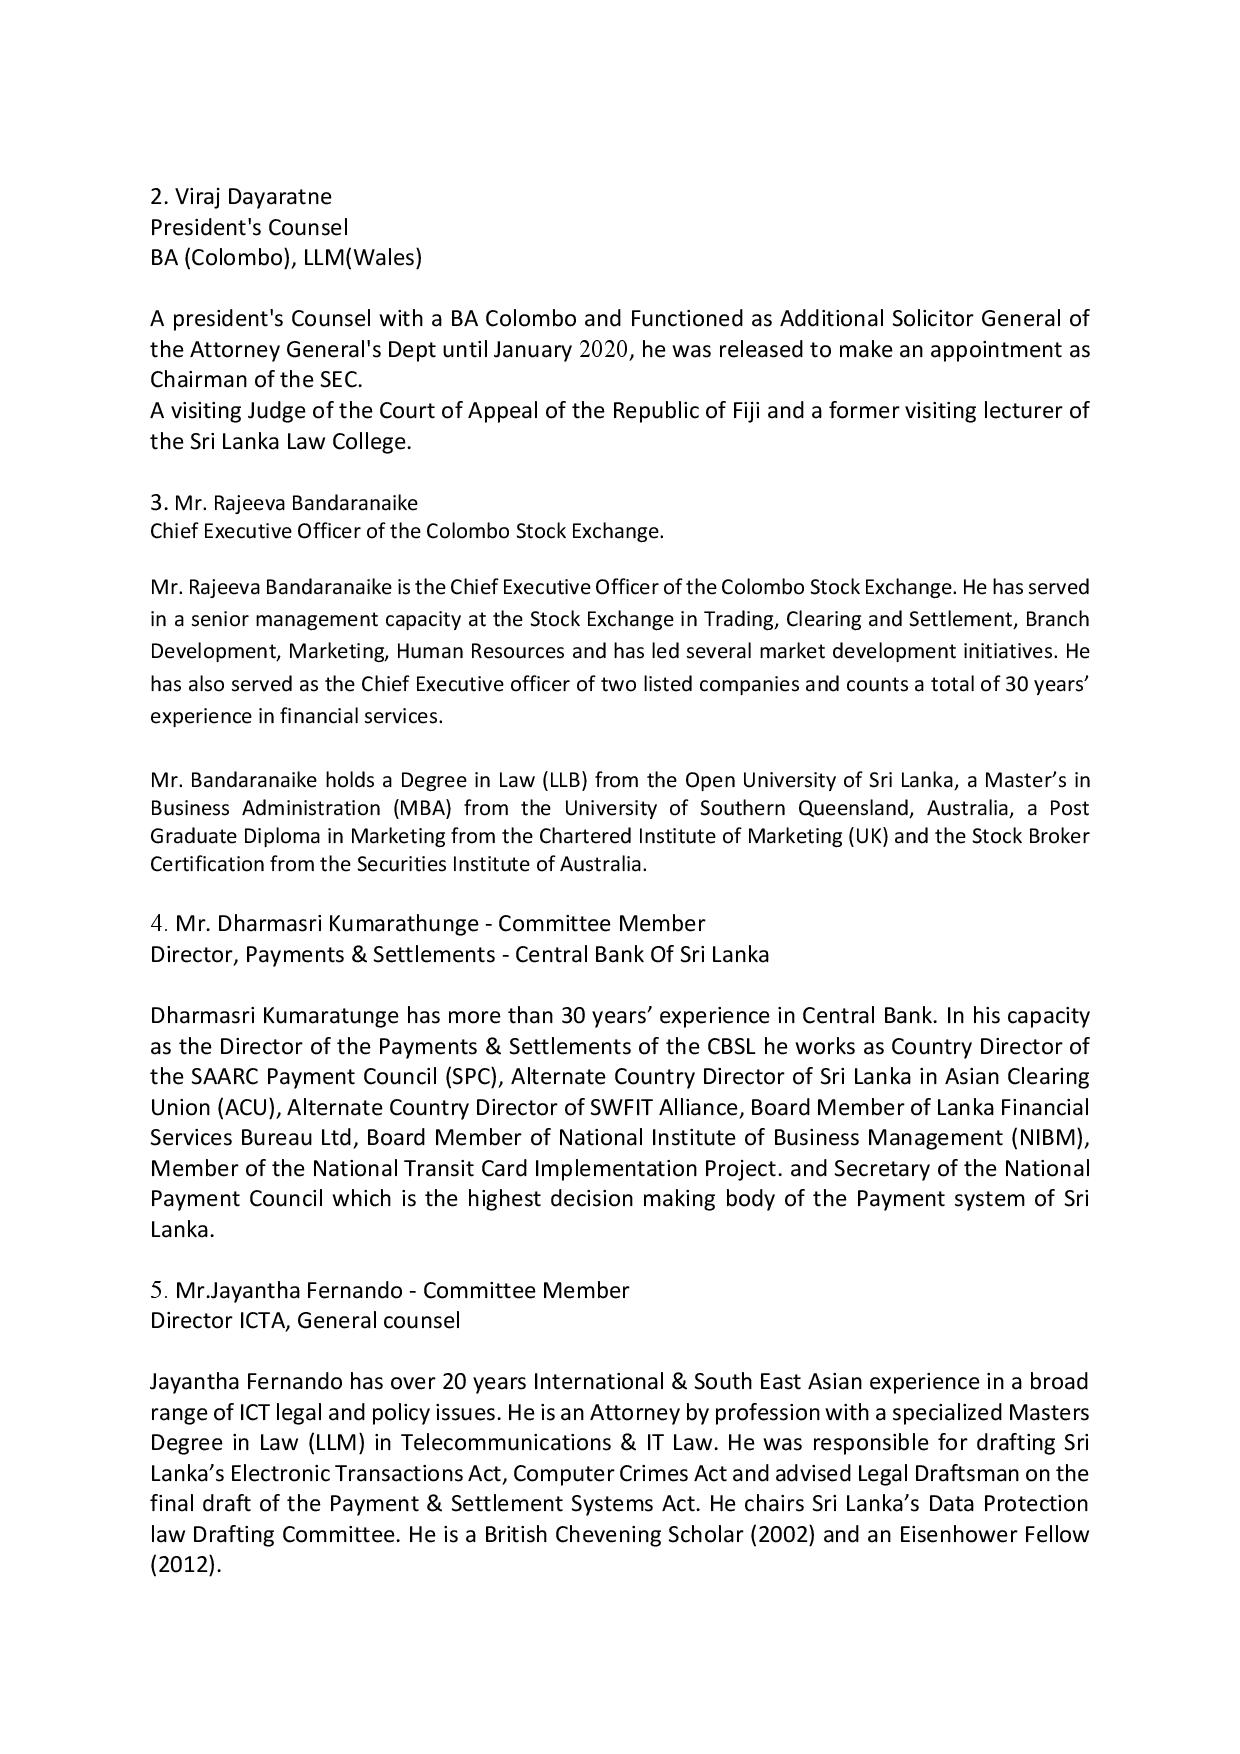 Expert Committee page 002